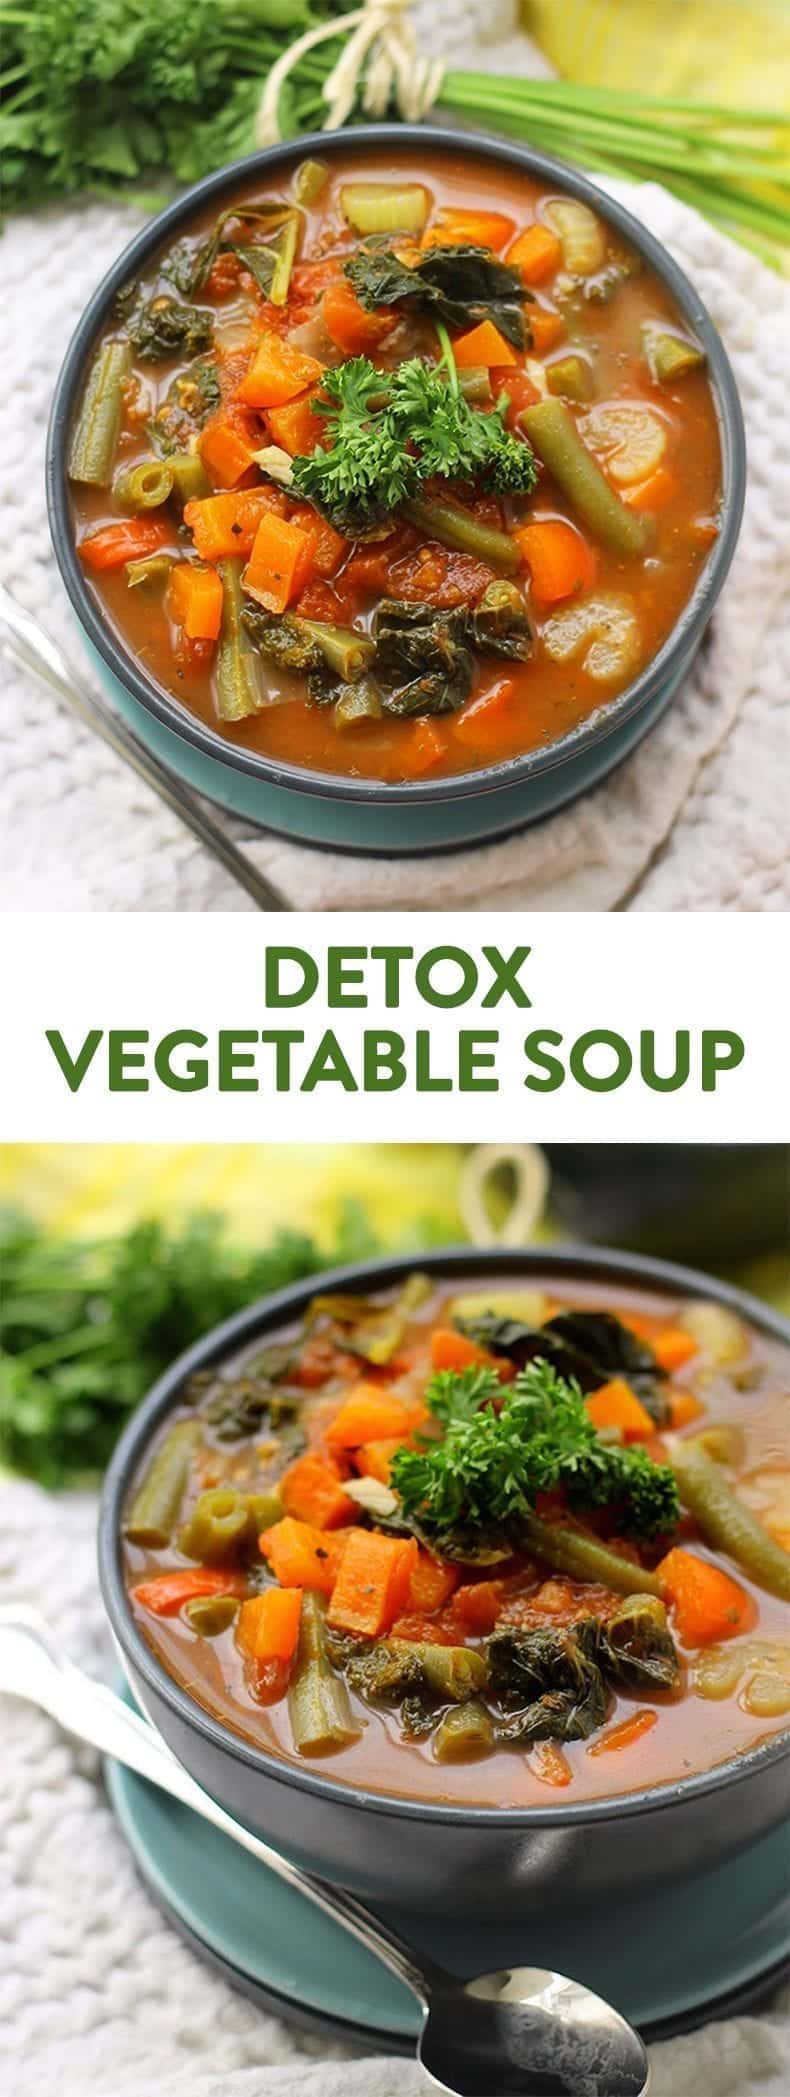 Too often is soup overlooked for its equally delicious counterpart, soup! Bring on the healthful goodness with this delicious & hearty Detox Vegetable Soup!